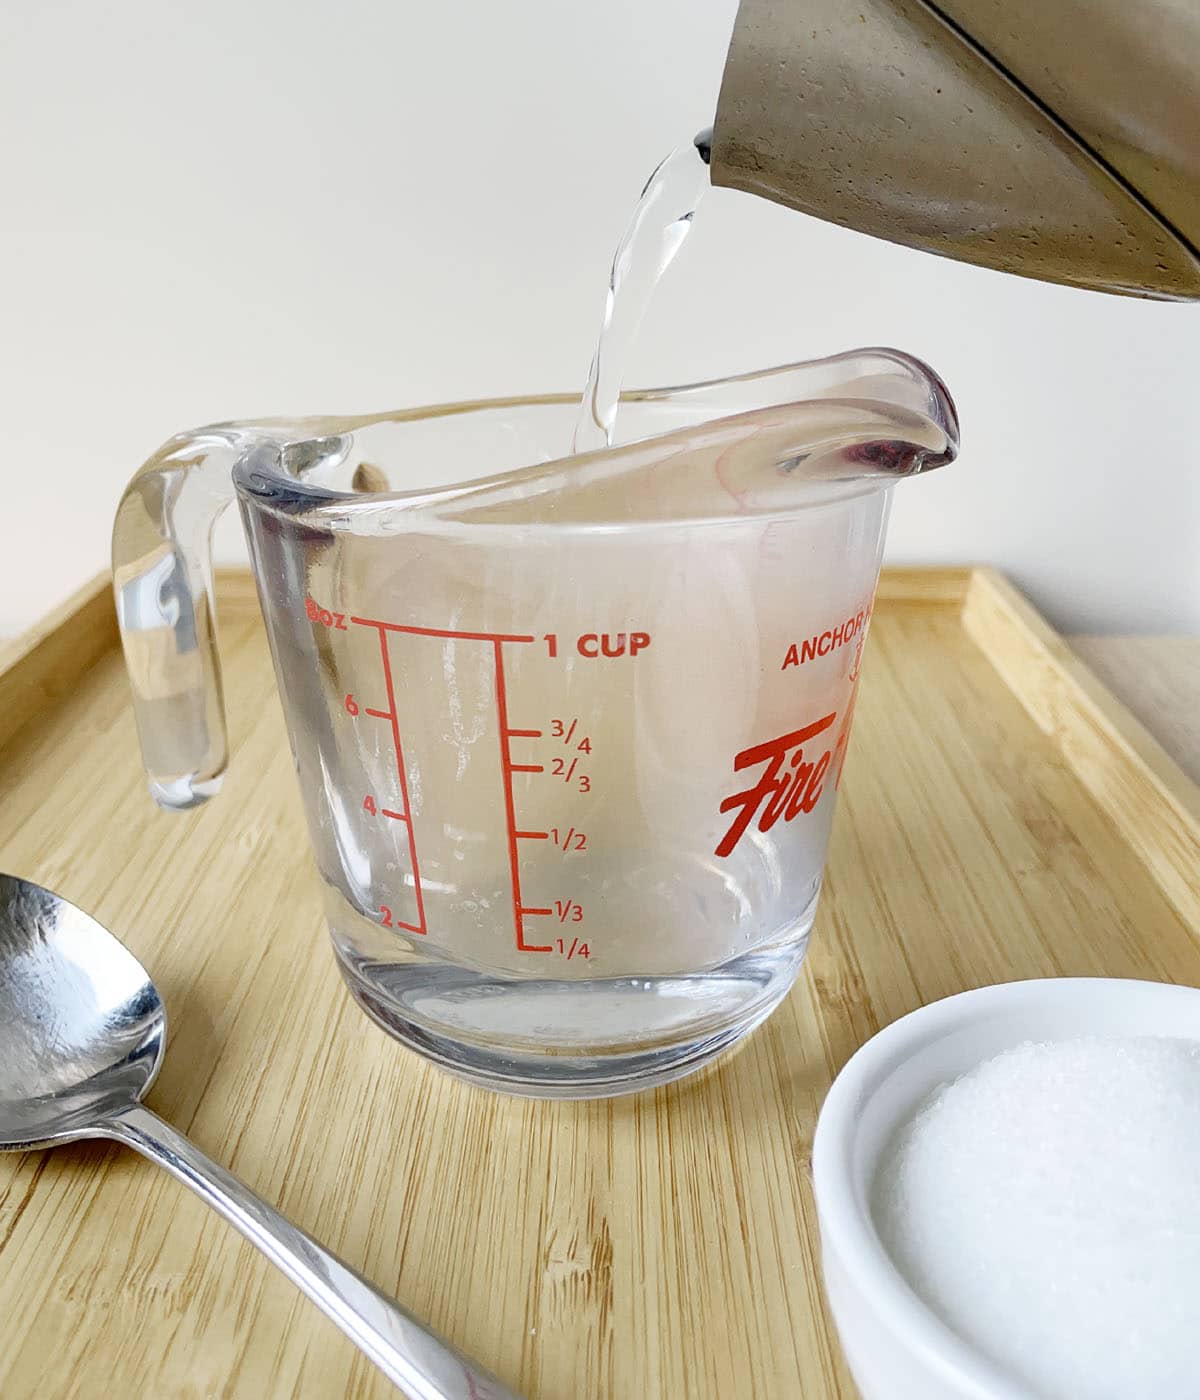 Hot water being poured from a kettle into a glass measuring cup.